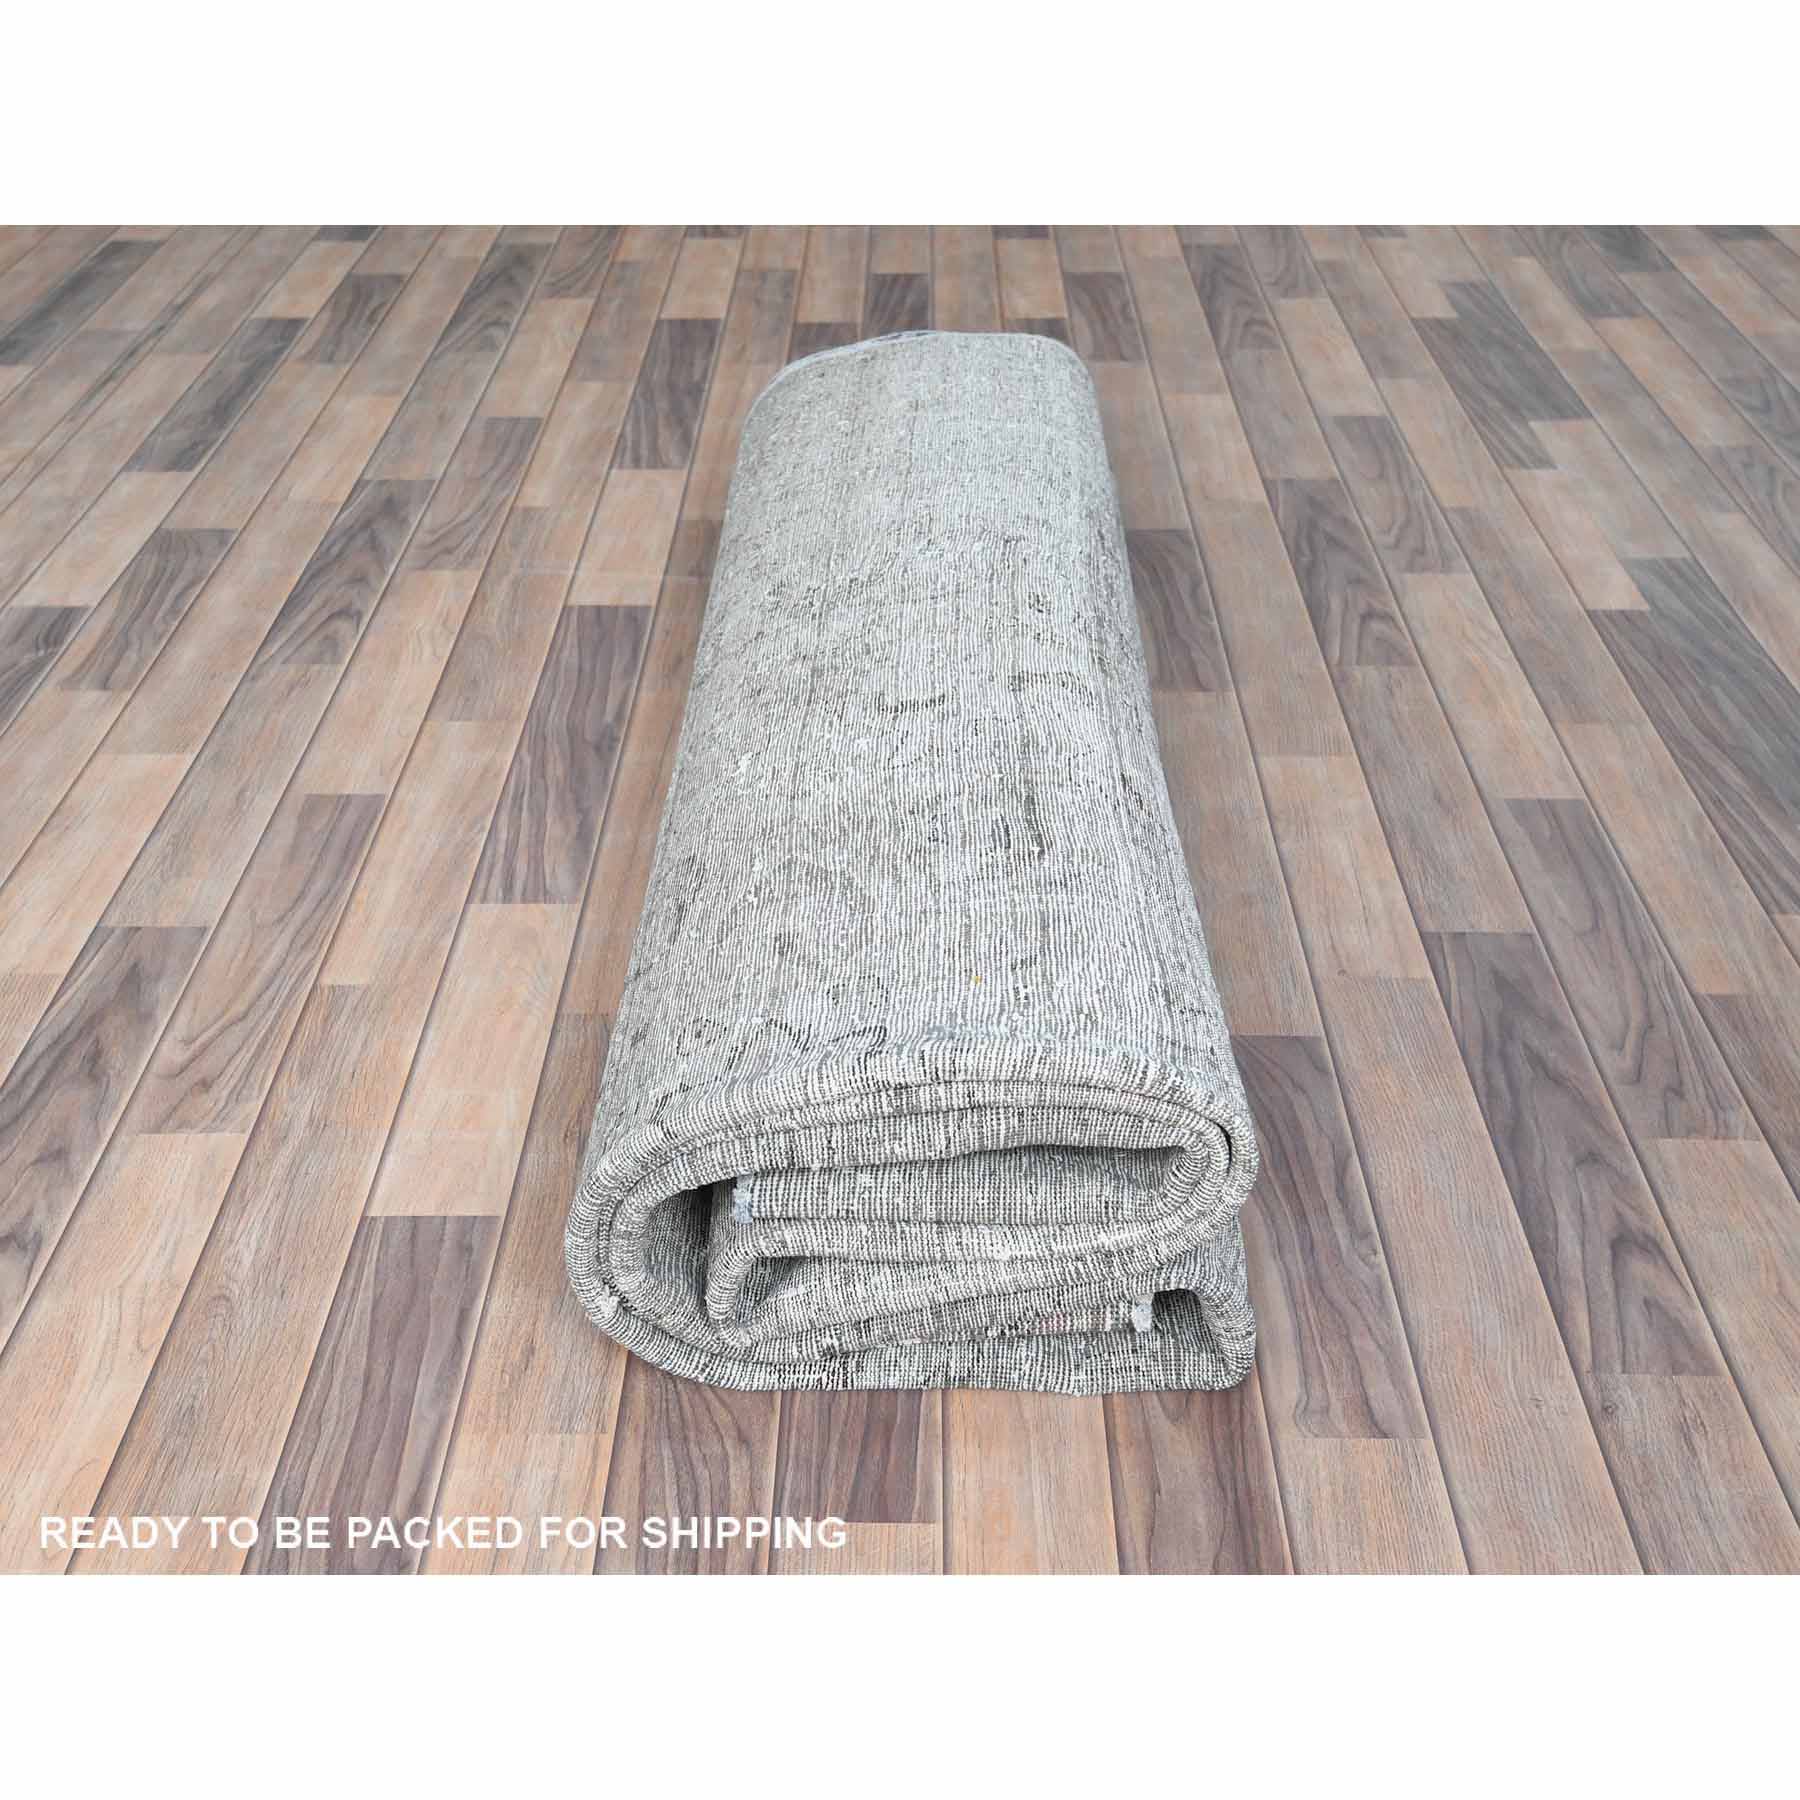 Overdyed-Vintage-Hand-Knotted-Rug-412720